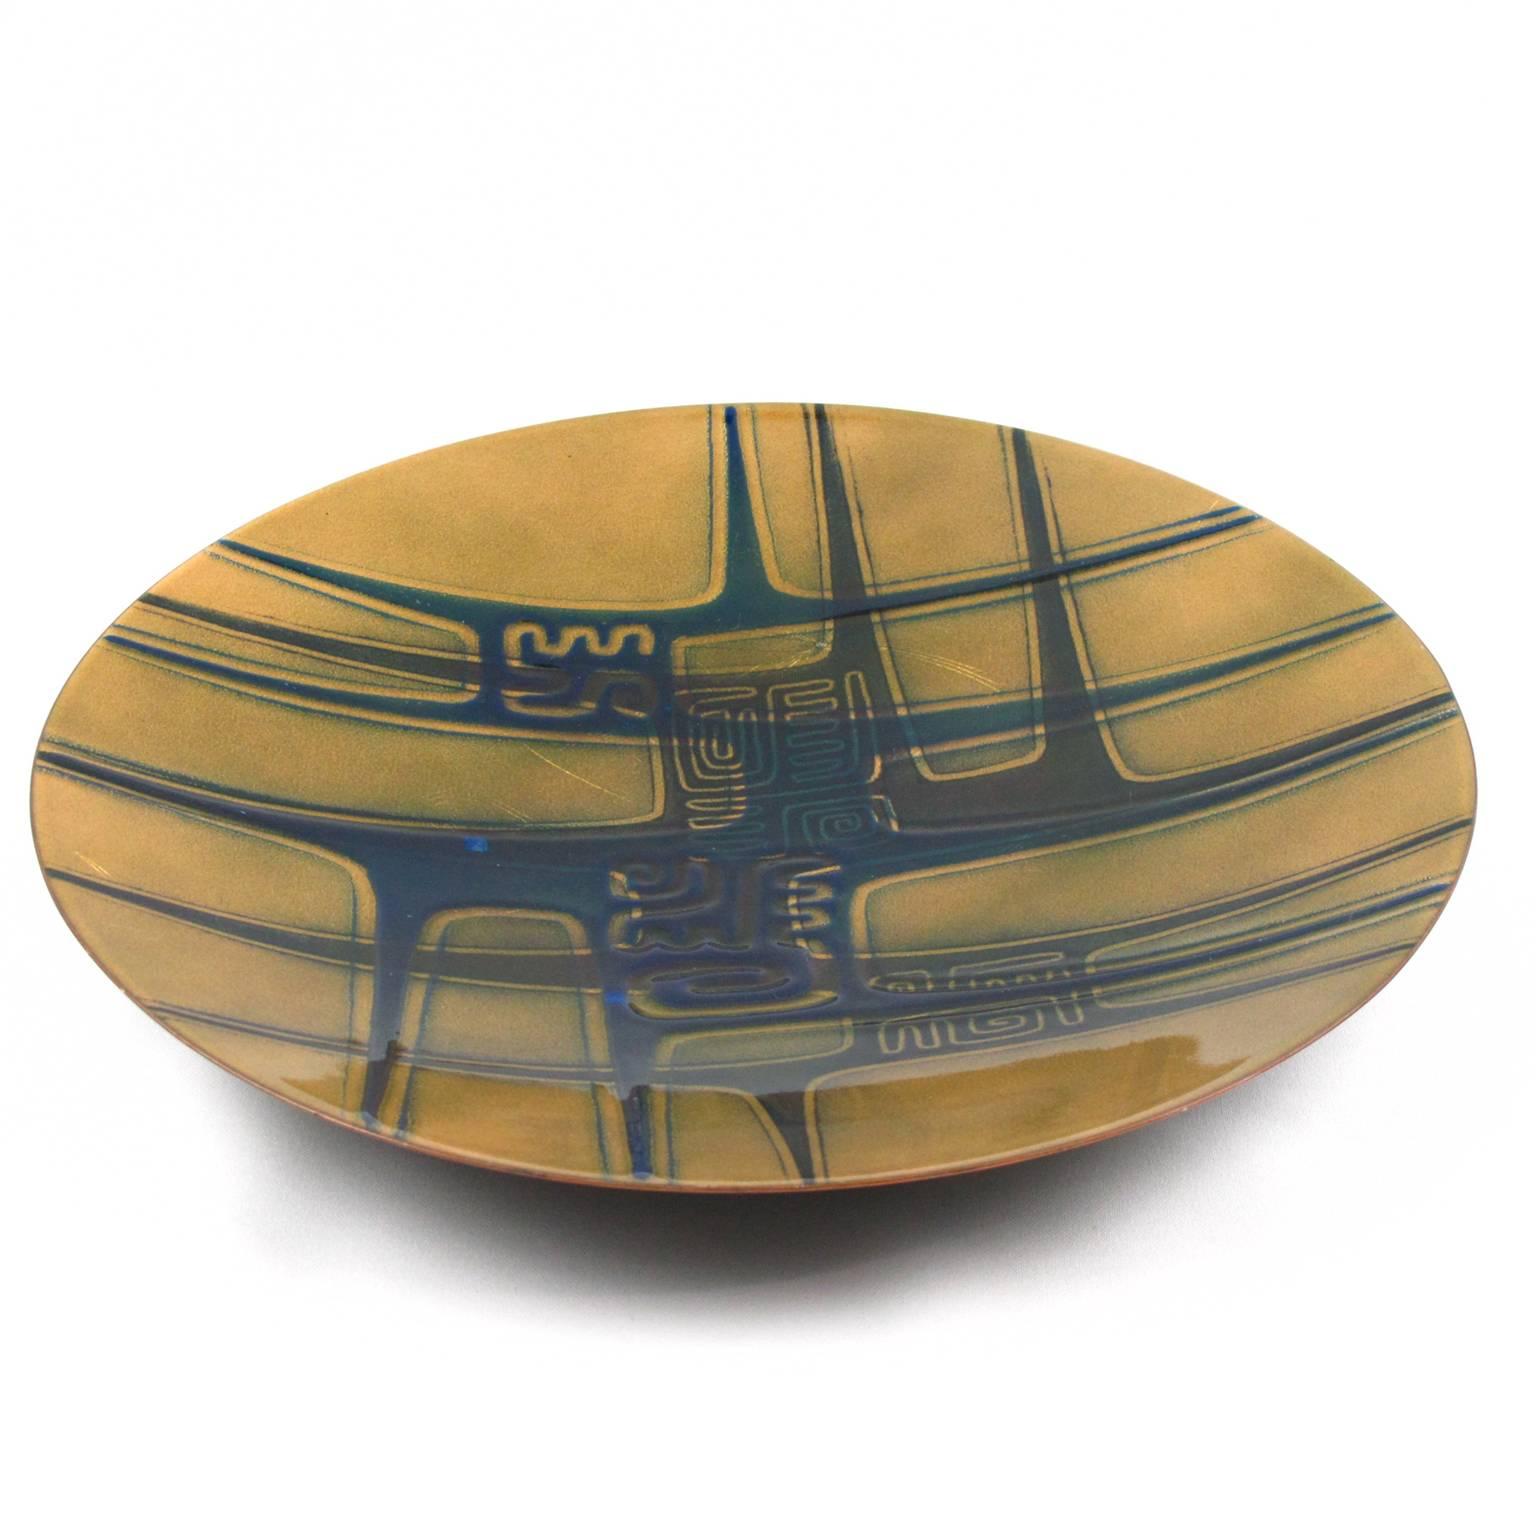 Stunning Mid-Century Modernist handcrafted and fired enamel on copper plate by Canadian Quebec artist, Jules Perrier, circa 1960s. Abstract design with biomorphic kind of shape in contrasted colors of green, blue and black on yellow/gold background.